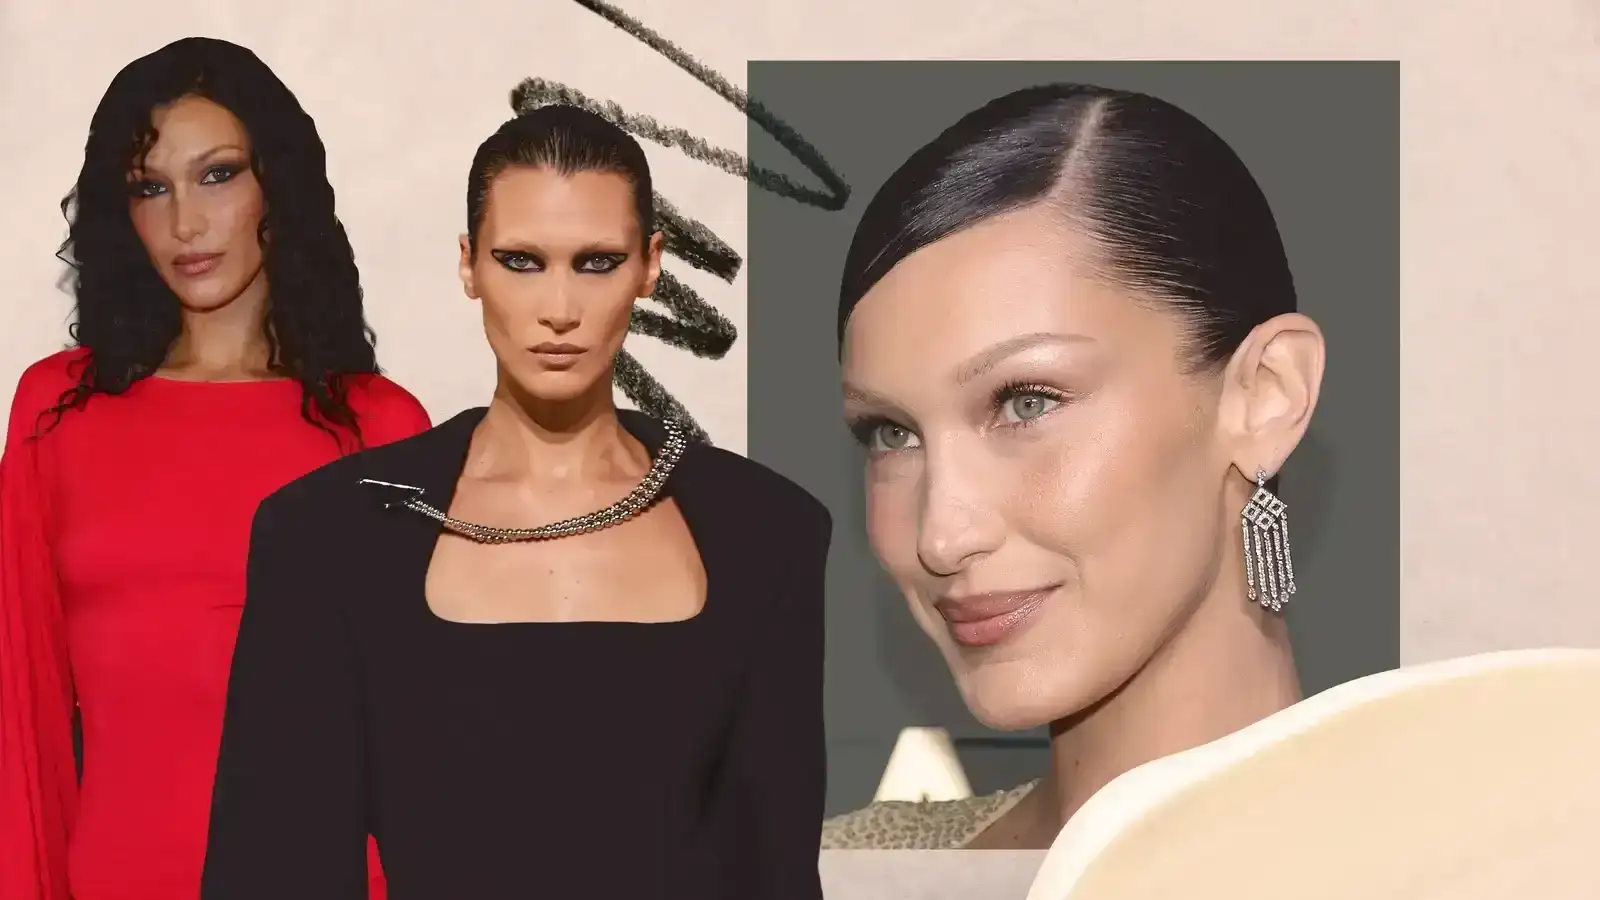 Bella Hadid Emerges From Hiatus With a New Love and a New Business